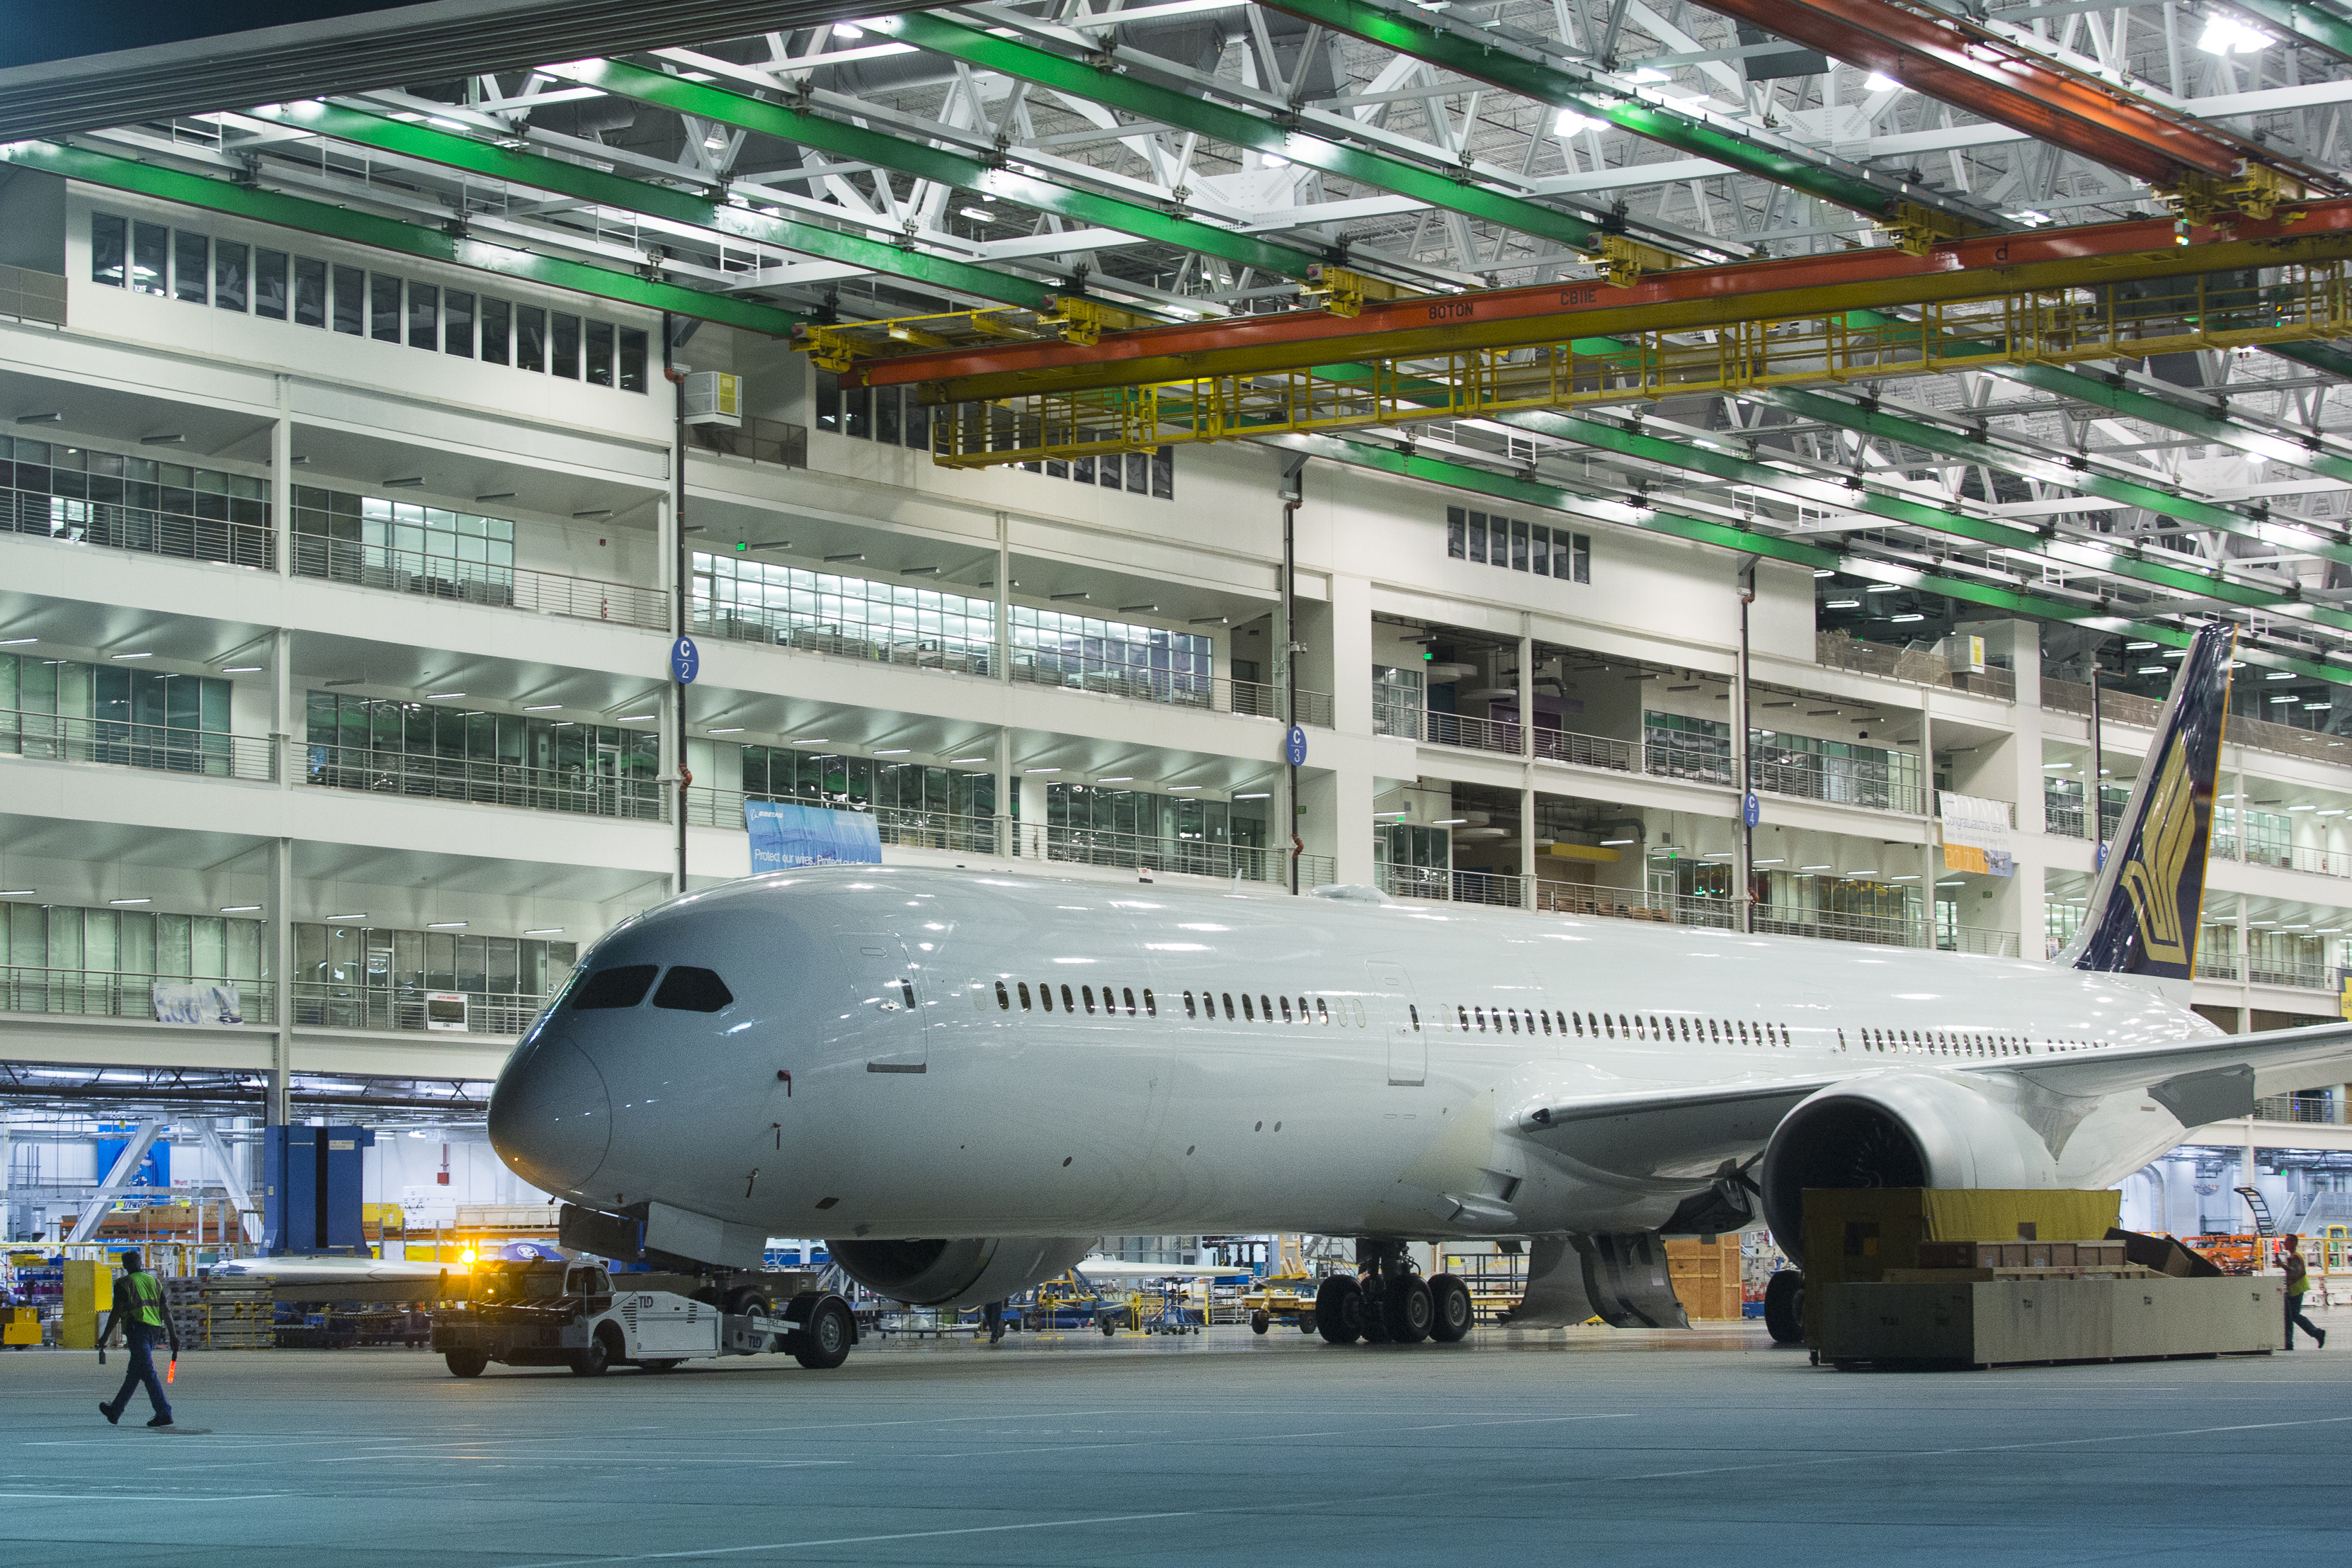 a large white airplane in a hangar